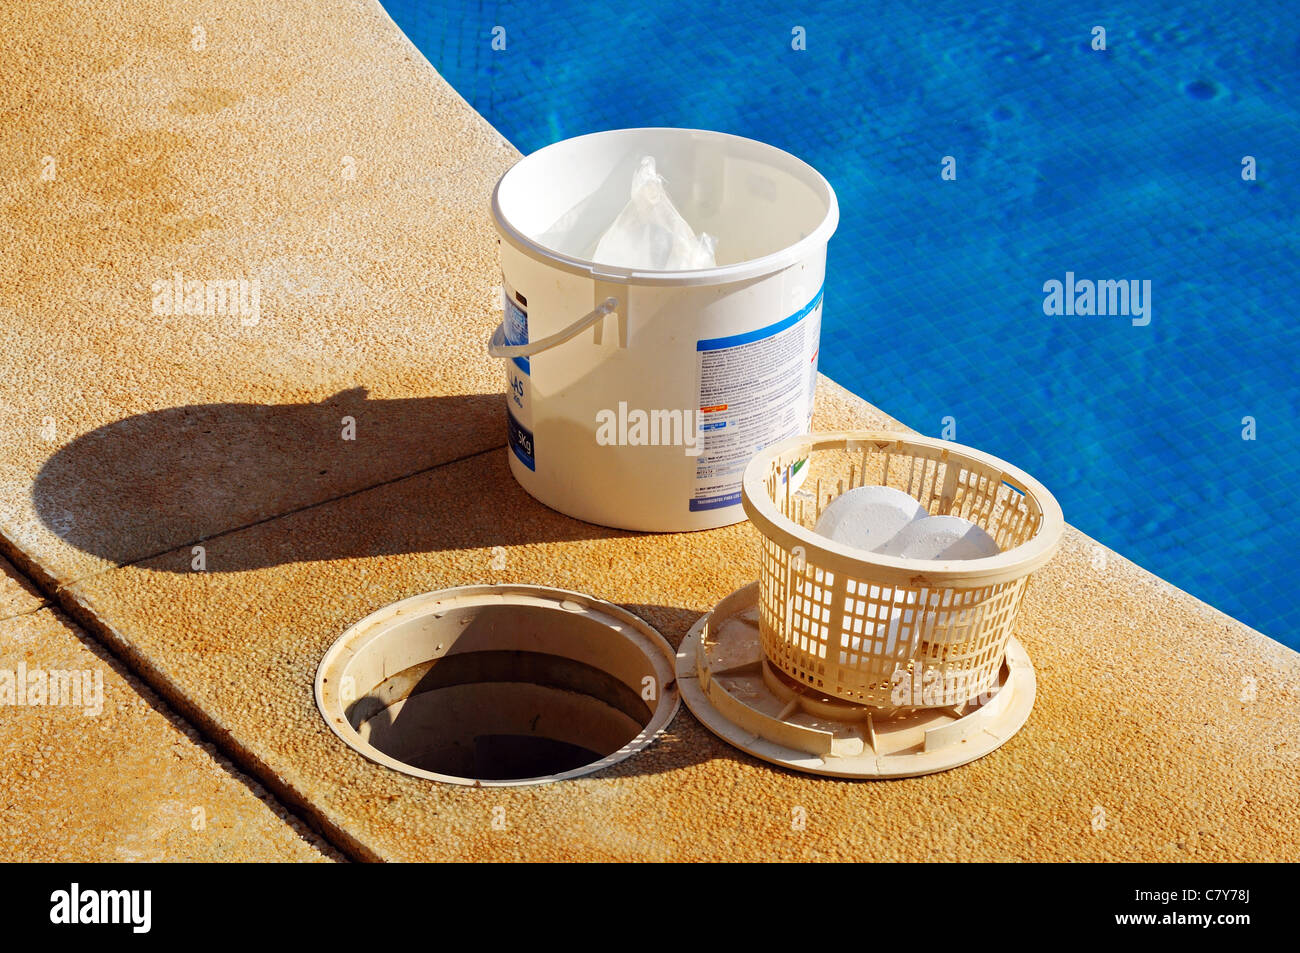 Pool chlorine tablets in basket and tub at poolside, Calahonda, Mijas Costa, Costa del Sol, Andalucia, Spain, Western Europe. Stock Photo